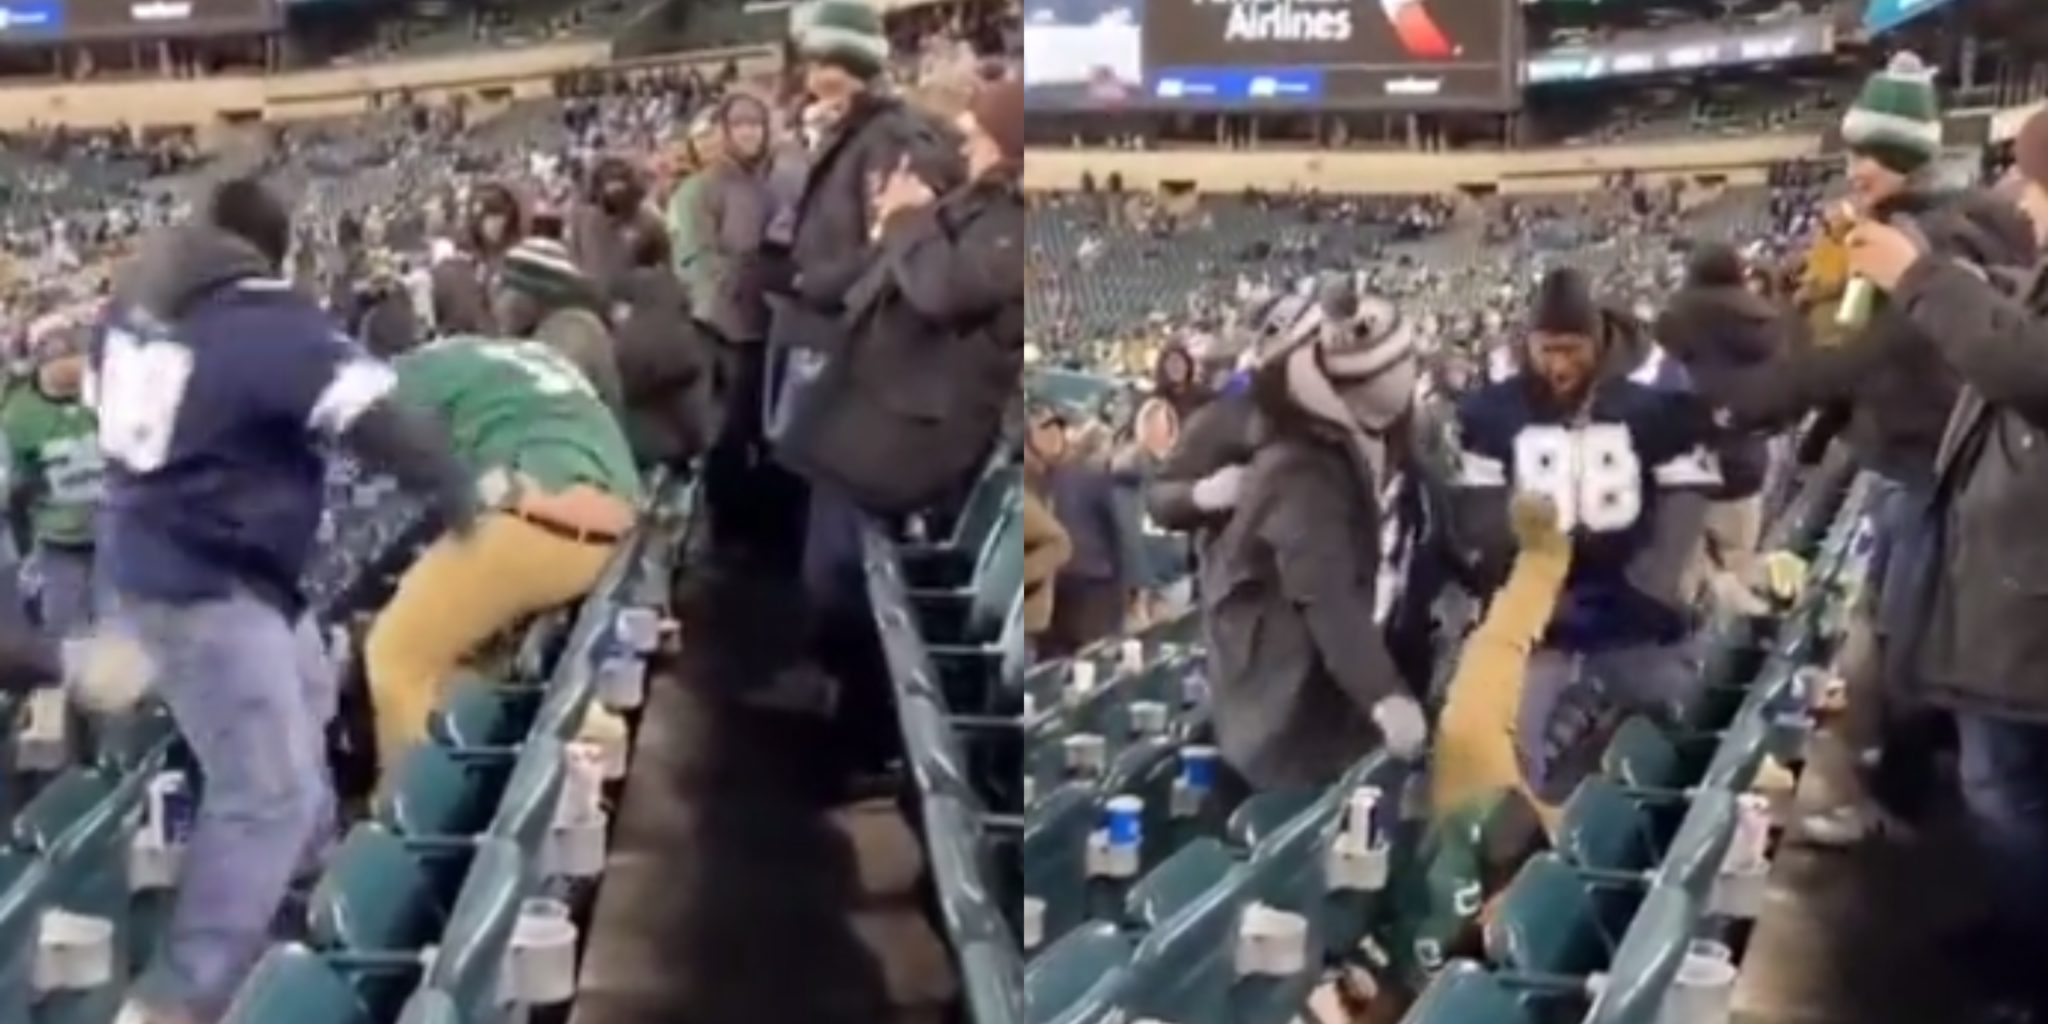 Cowboys Fan Destroyed Two Eagles Fans During Brutal Fight In The Stands